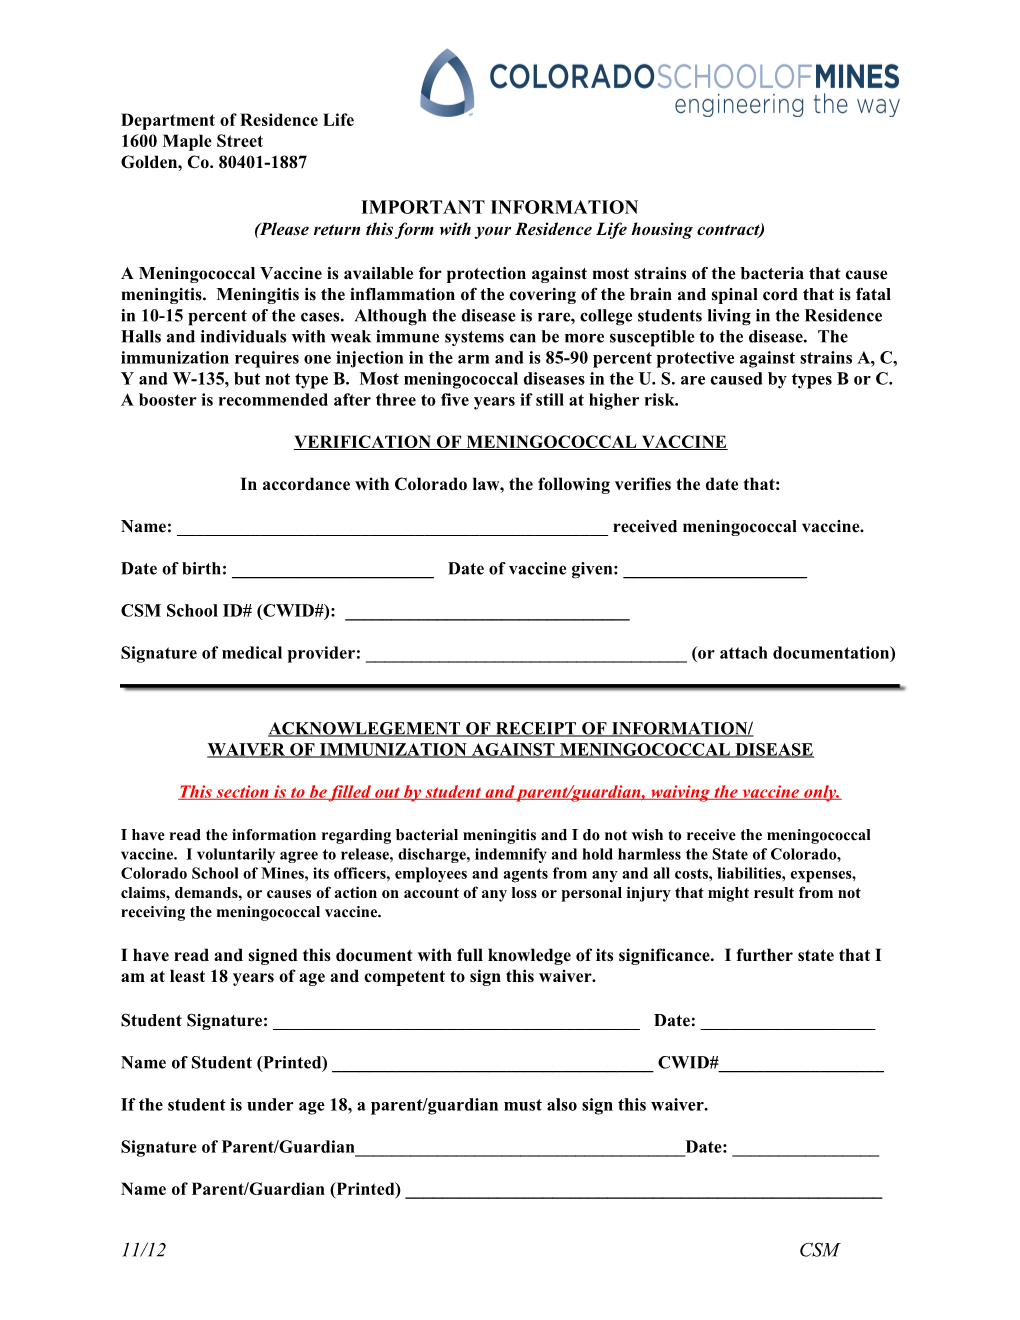 Please Return This Form with Your Residence Life Housing Contract